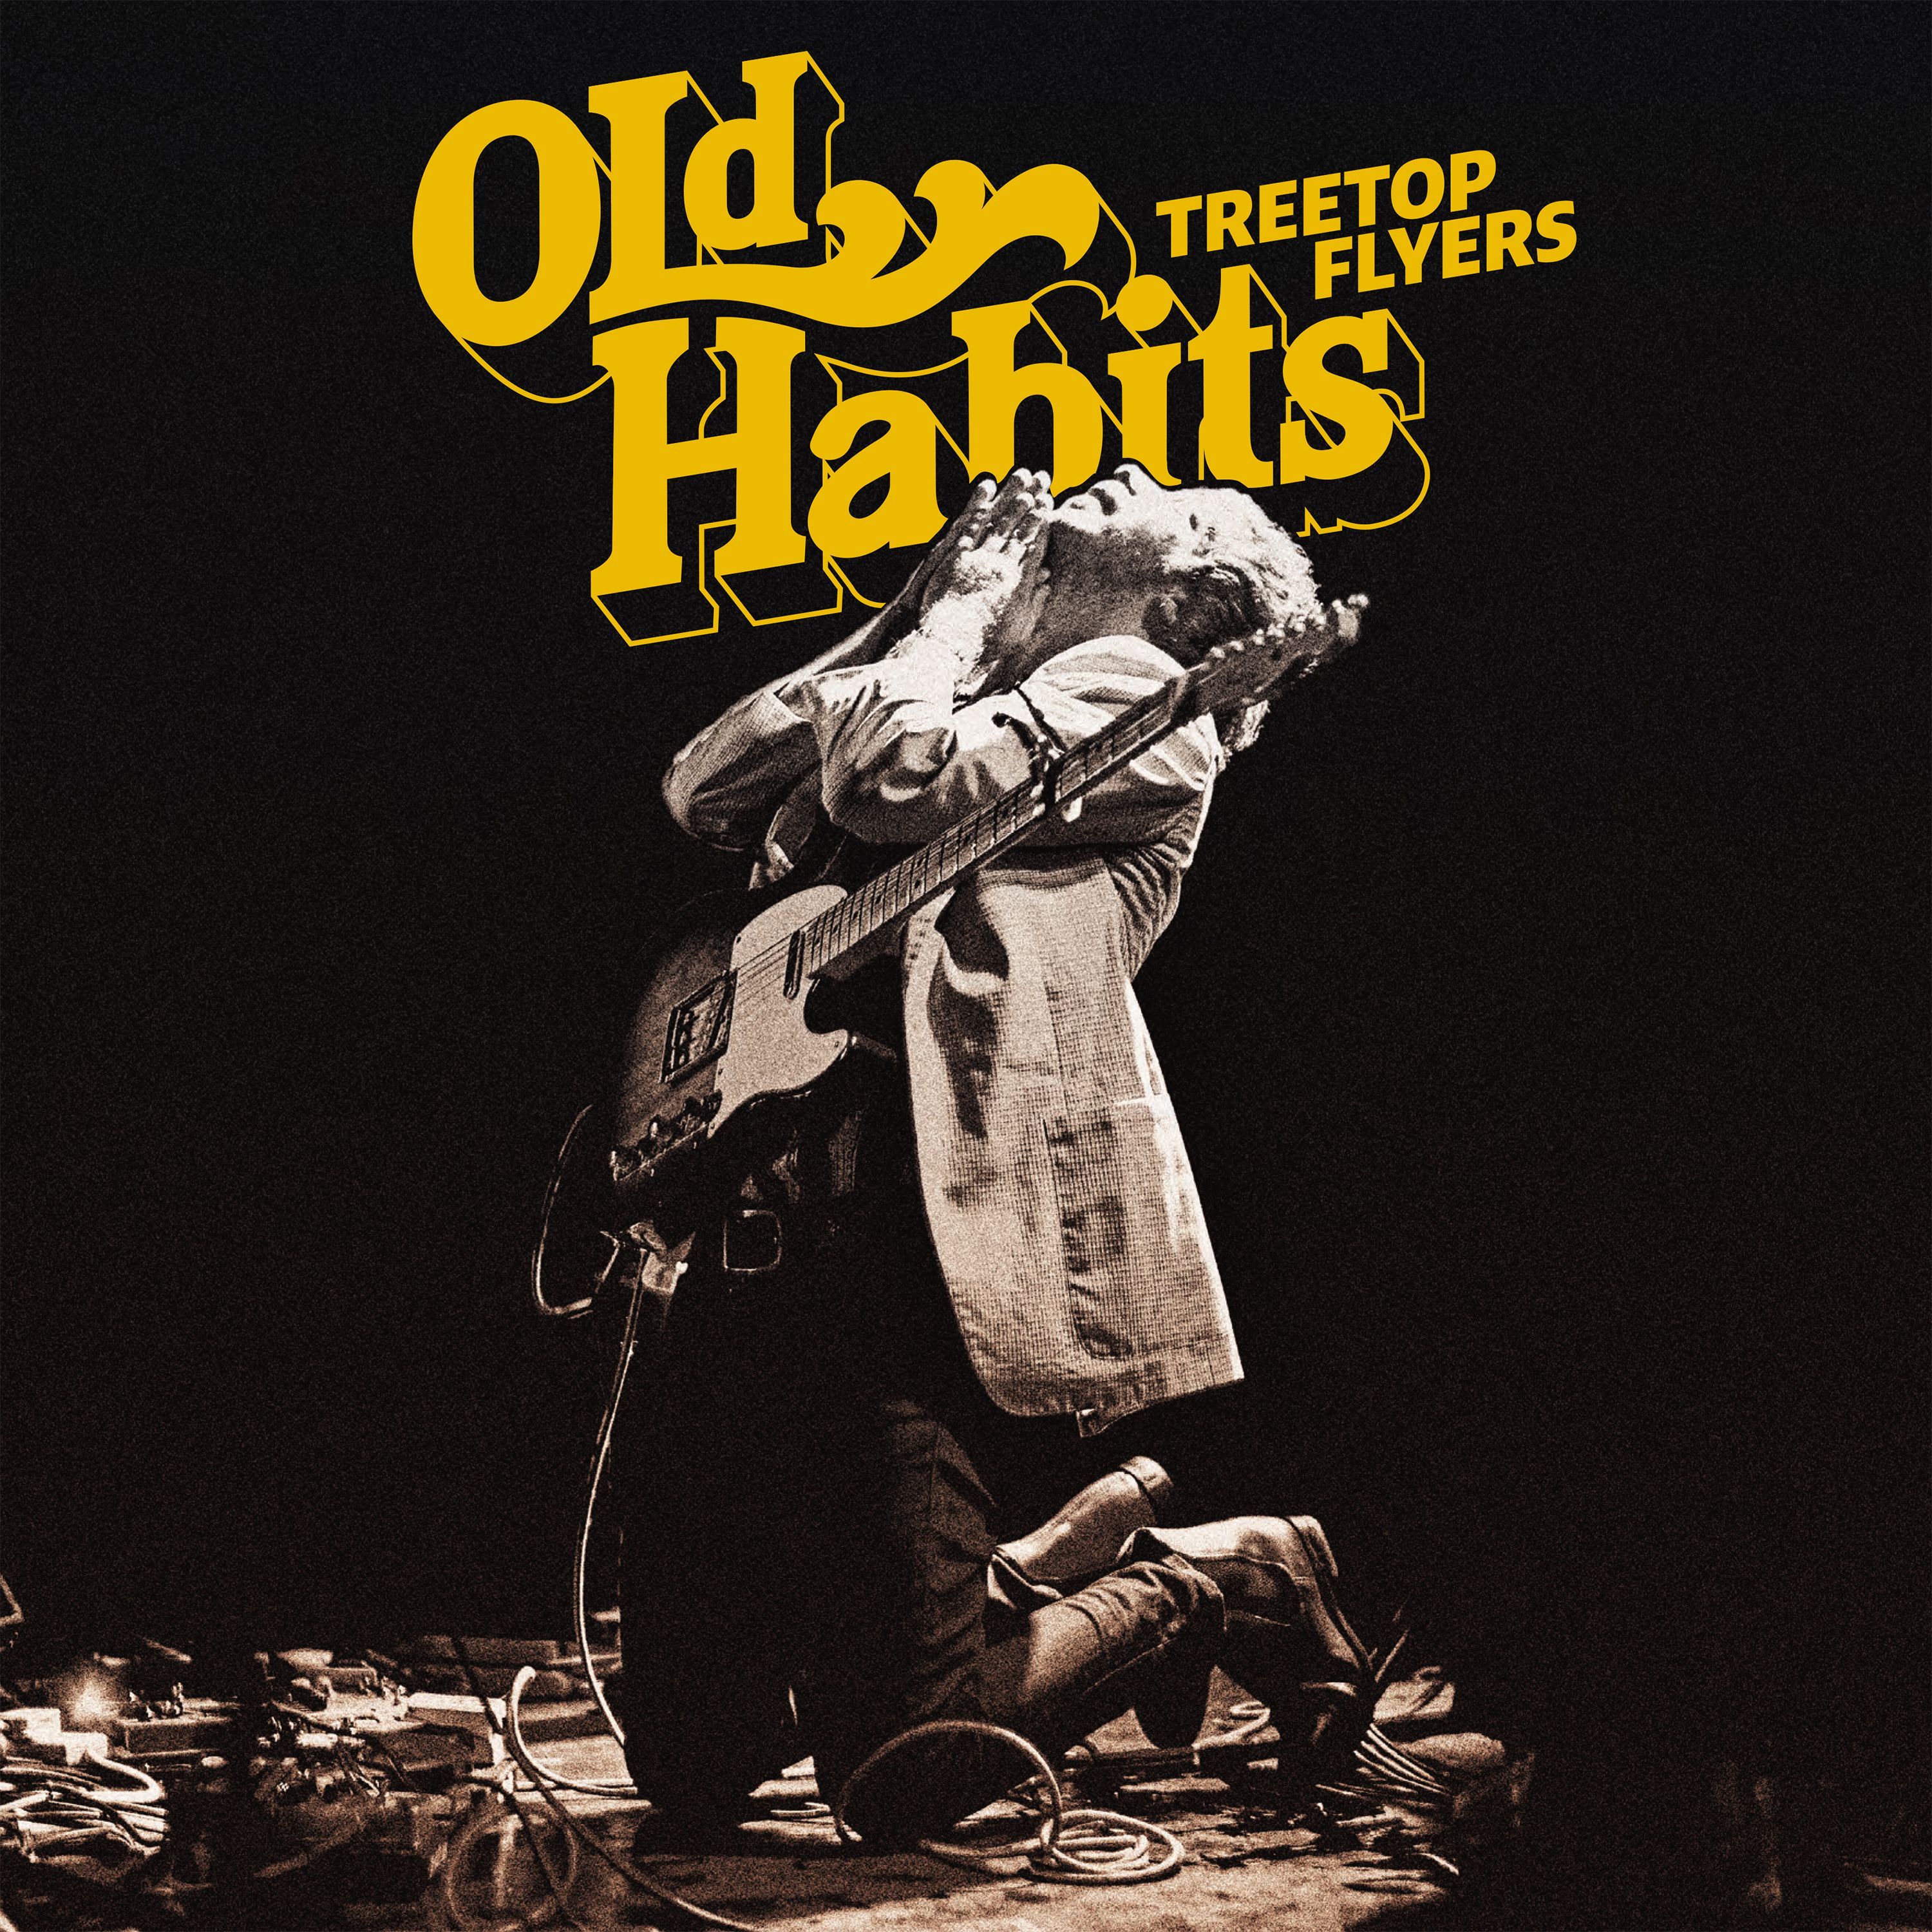 Treetop Flyers - Old Habits Album Cover